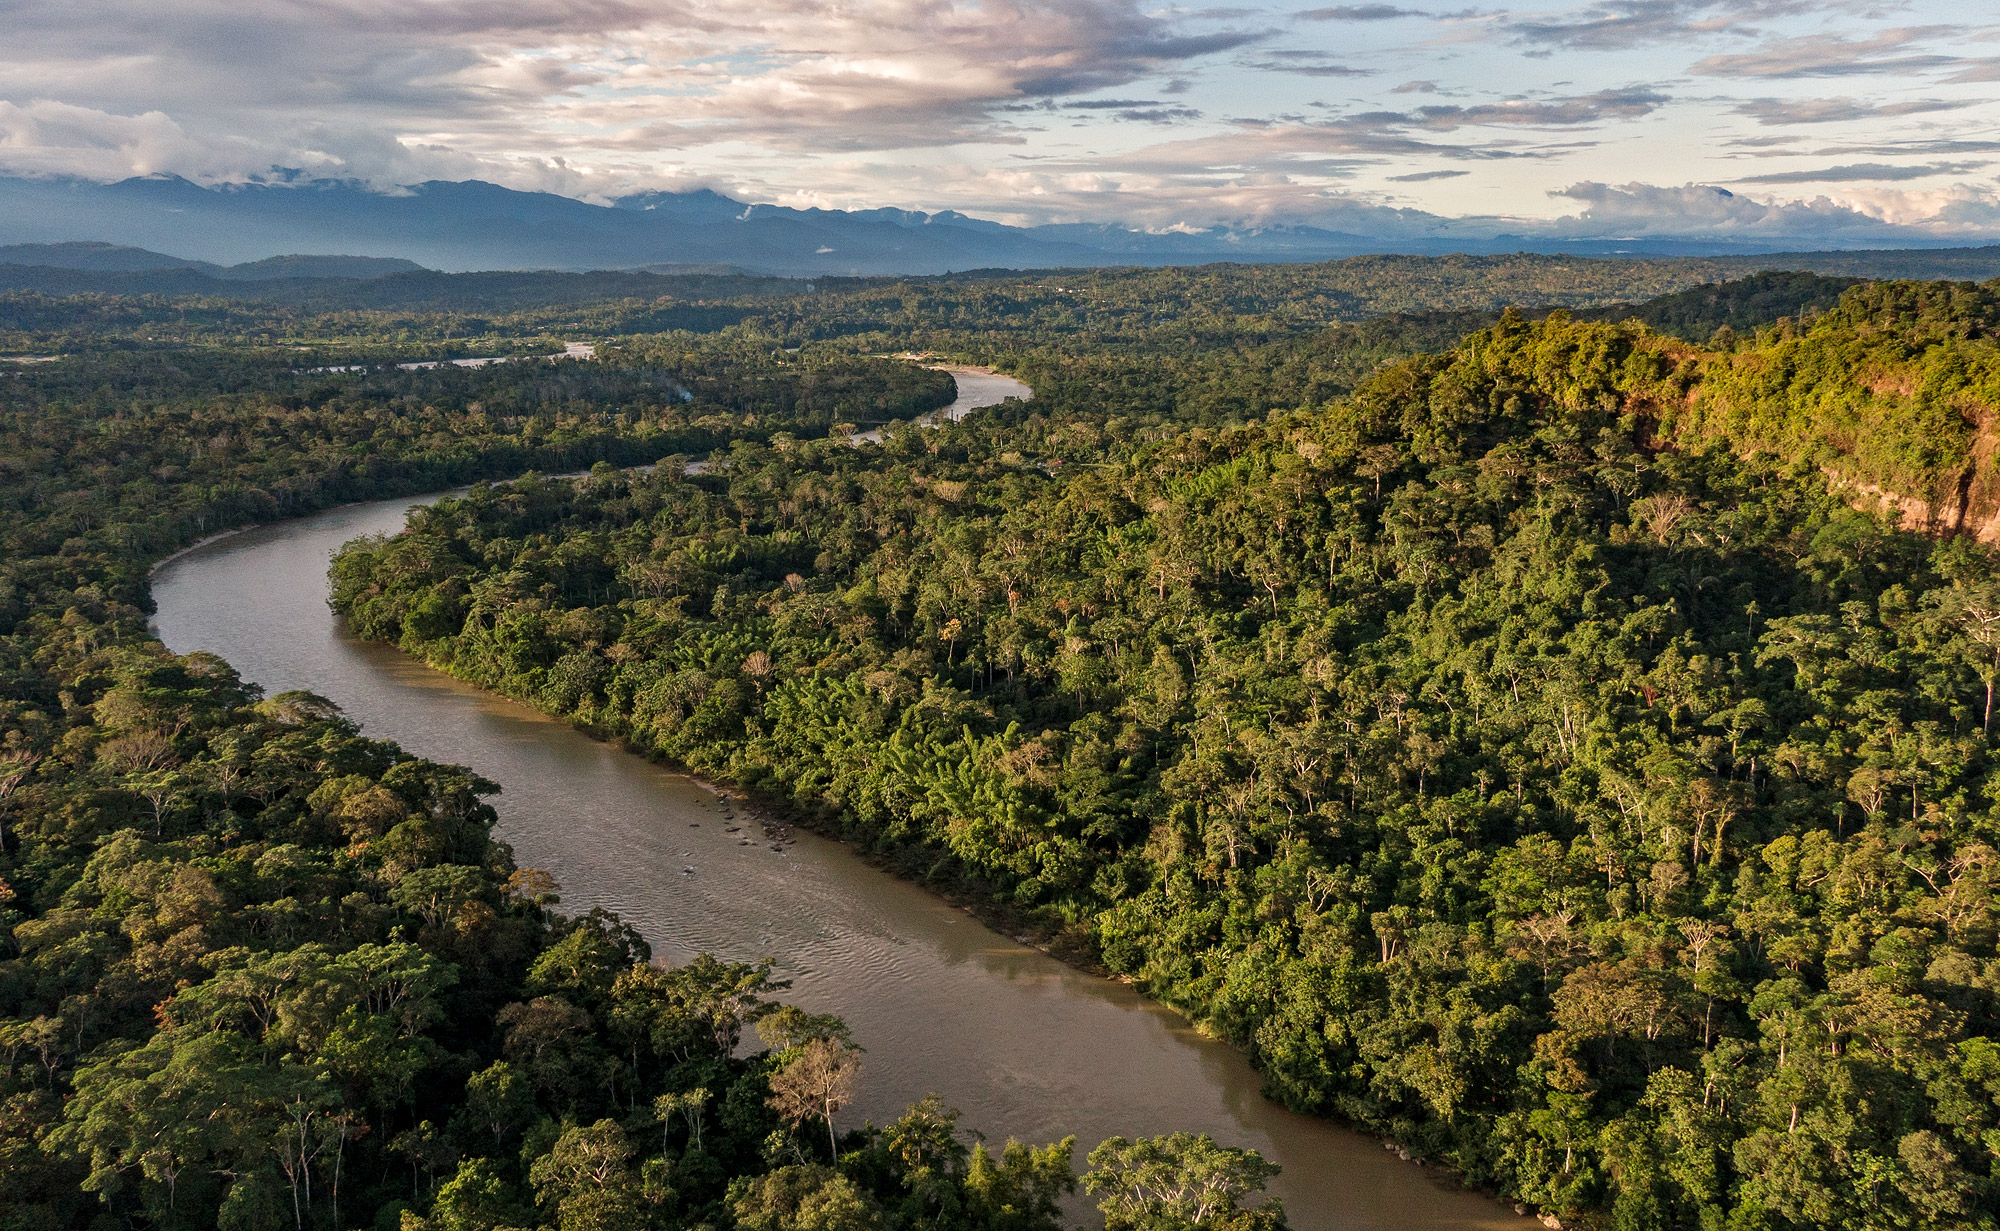 Drone image of the Pitalala Reserve river basin